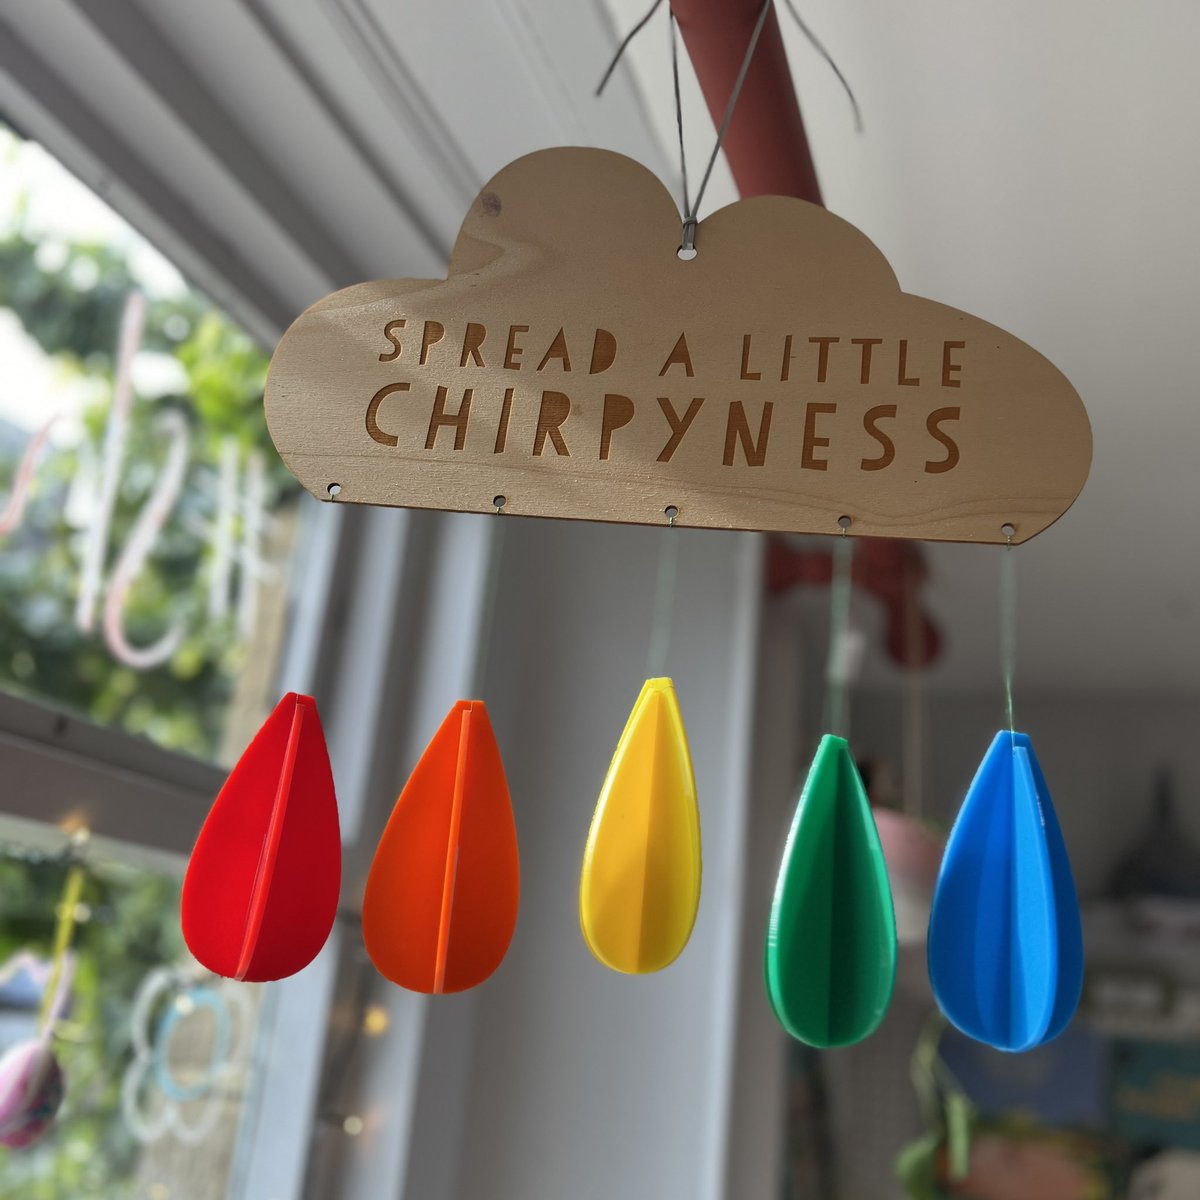 How will you be spreading a little Chirpyness today?